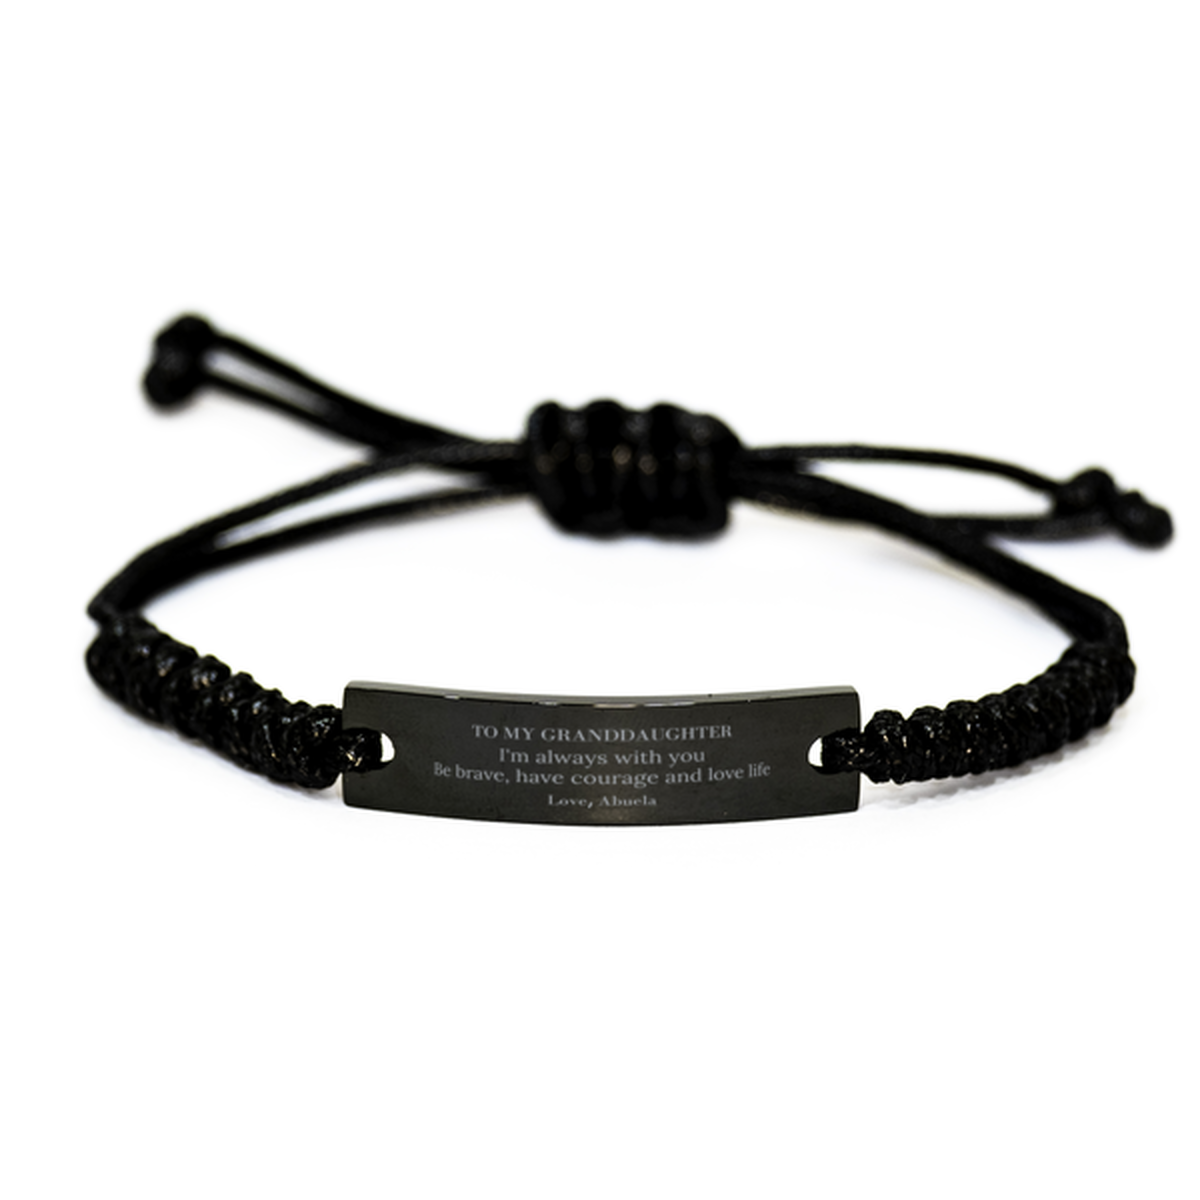 To My Granddaughter Gifts from Abuela, Unique Black Rope Bracelet Inspirational Christmas Birthday Graduation Gifts for Granddaughter I'm always with you. Be brave, have courage and love life. Love, Abuela